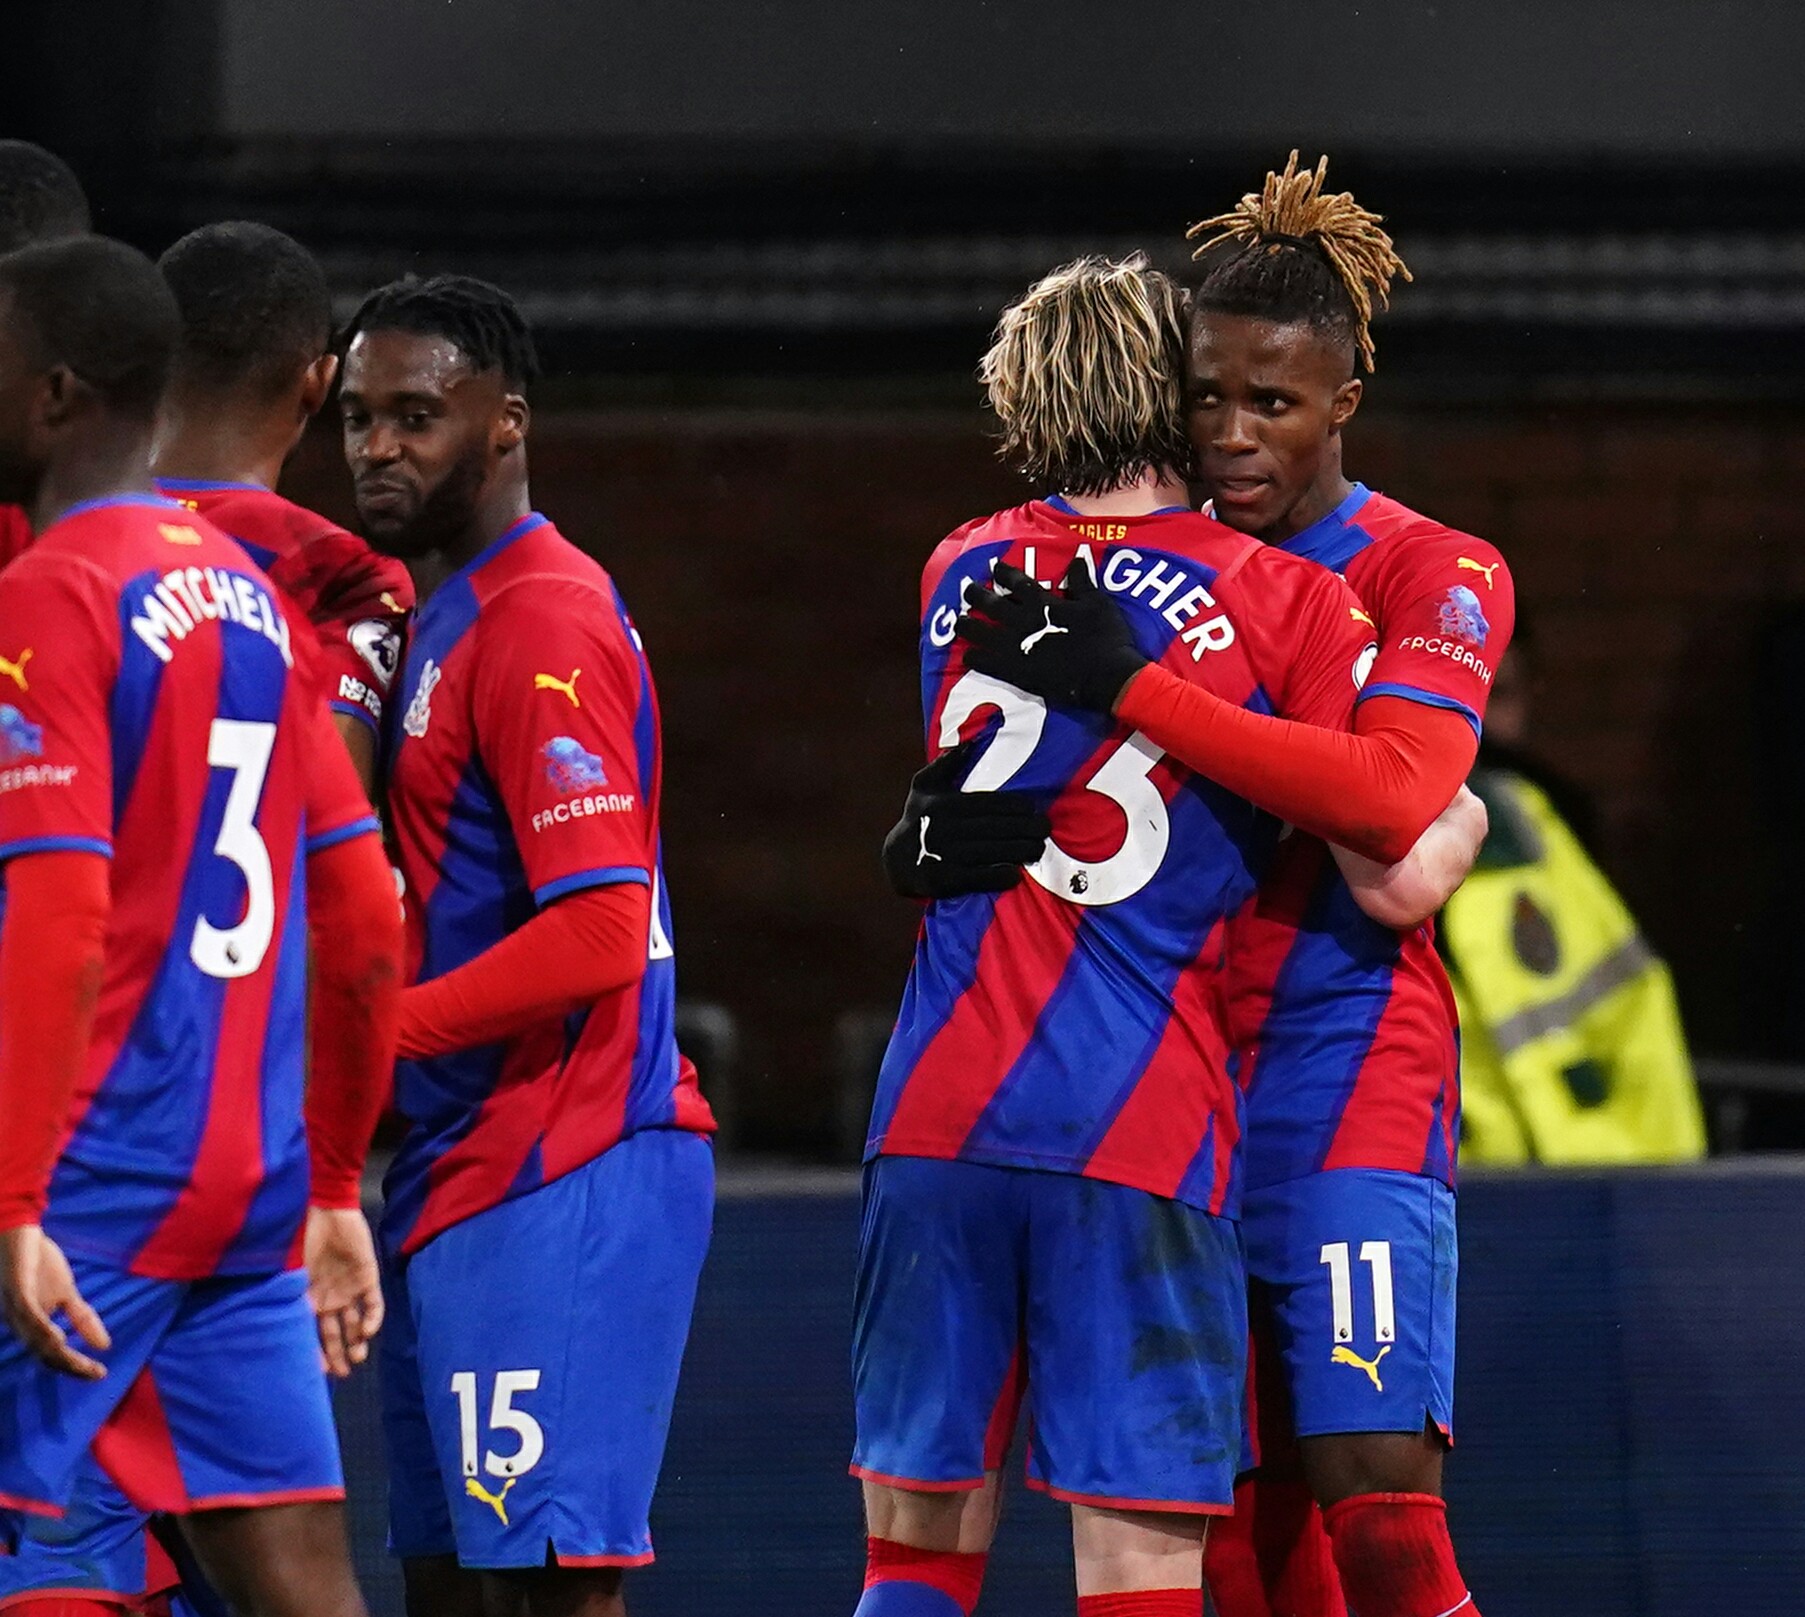 Arsenal’s Top Four Hopes Suffer Setback After Heavy Loss At Palace